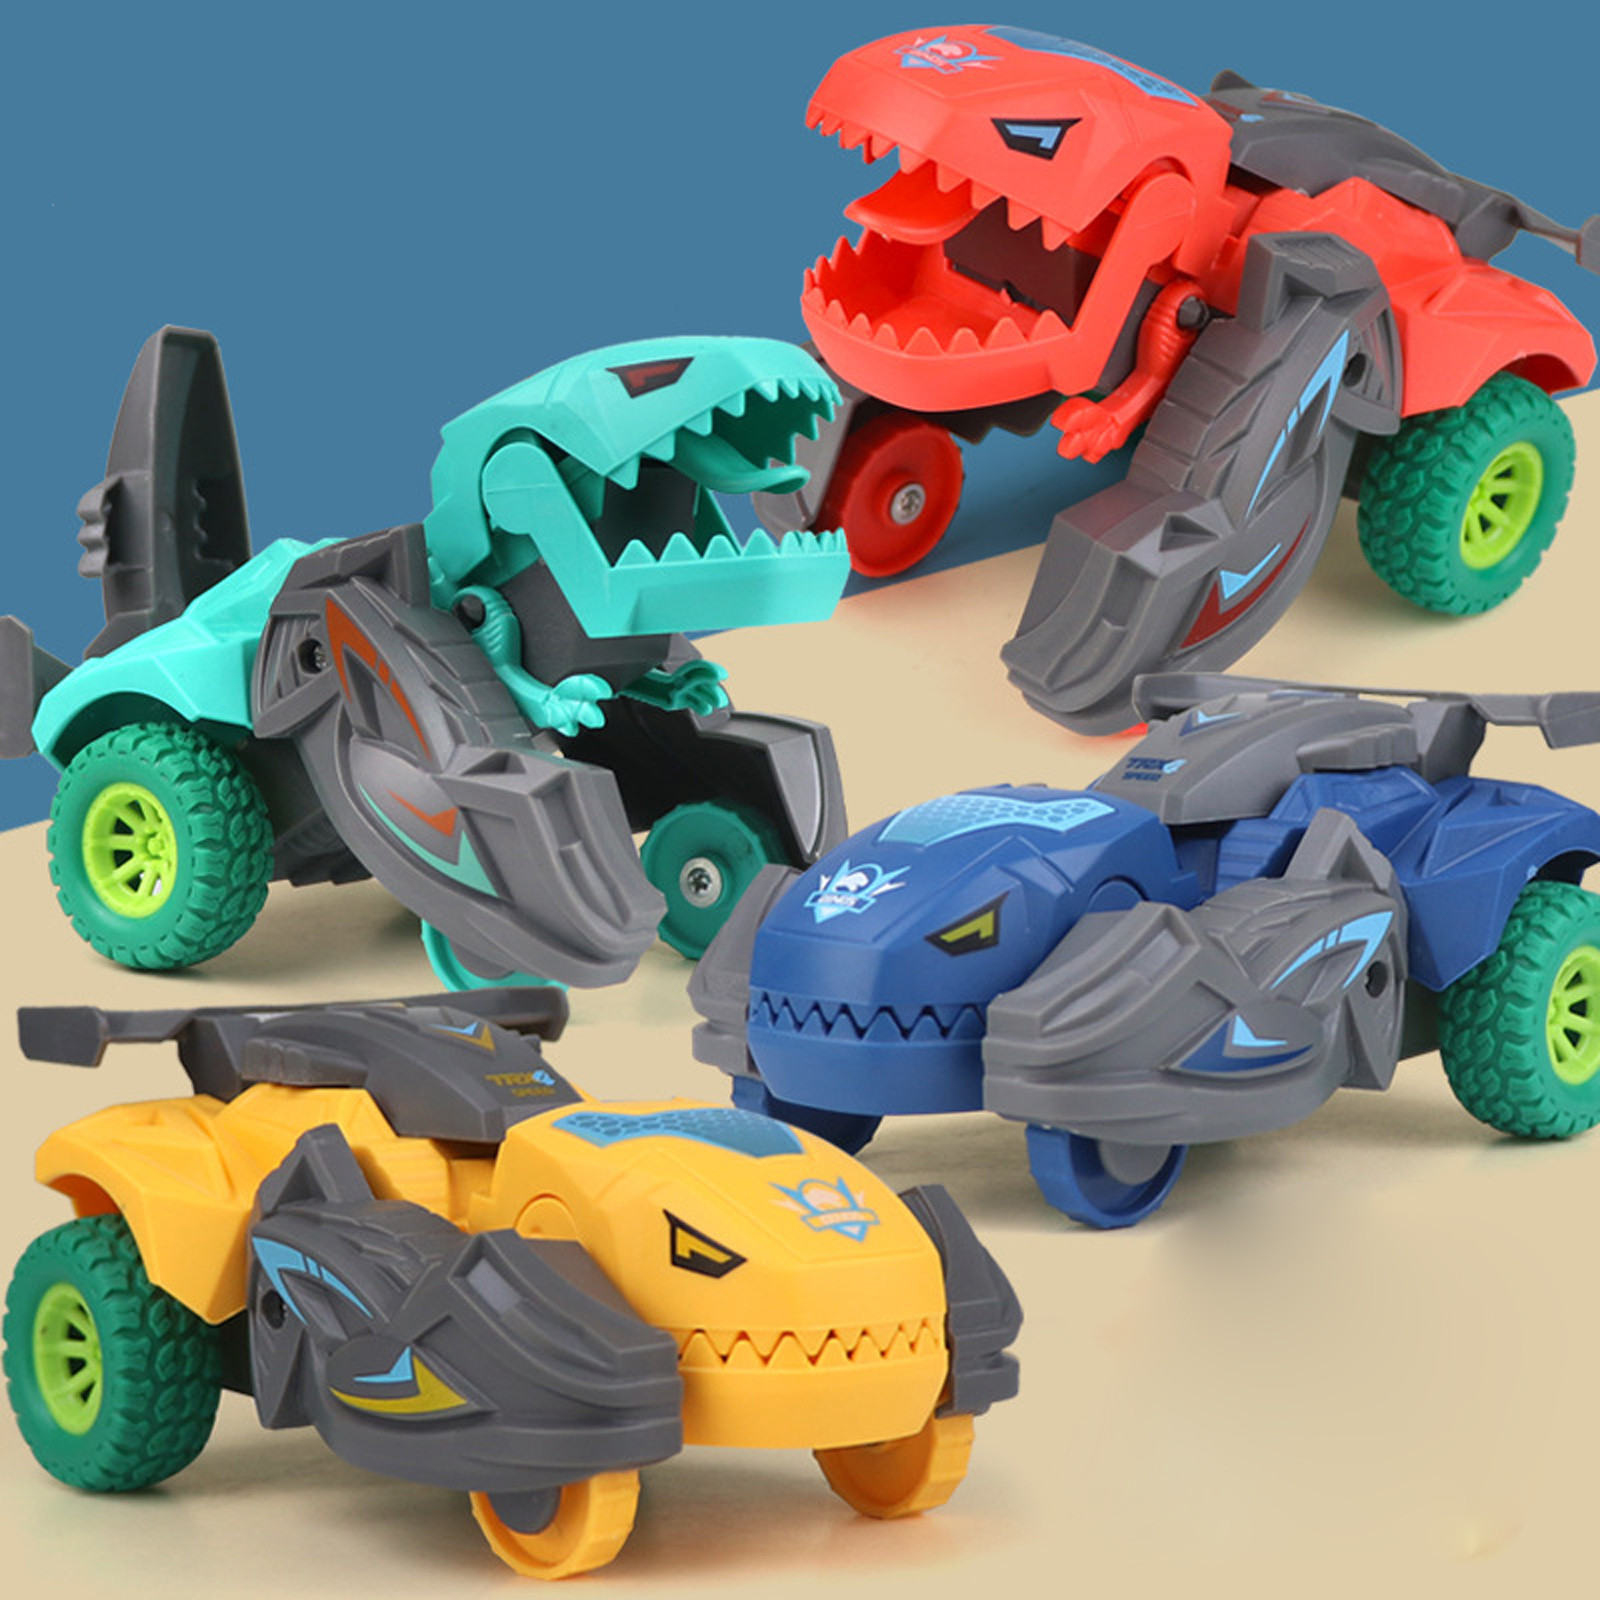 Kids Dinosaur Cars Combined Into One Transformer Dinosaur Car Stunt Car Toy For Xmas Kids Birthday Gift Traffic Vehicle Toy